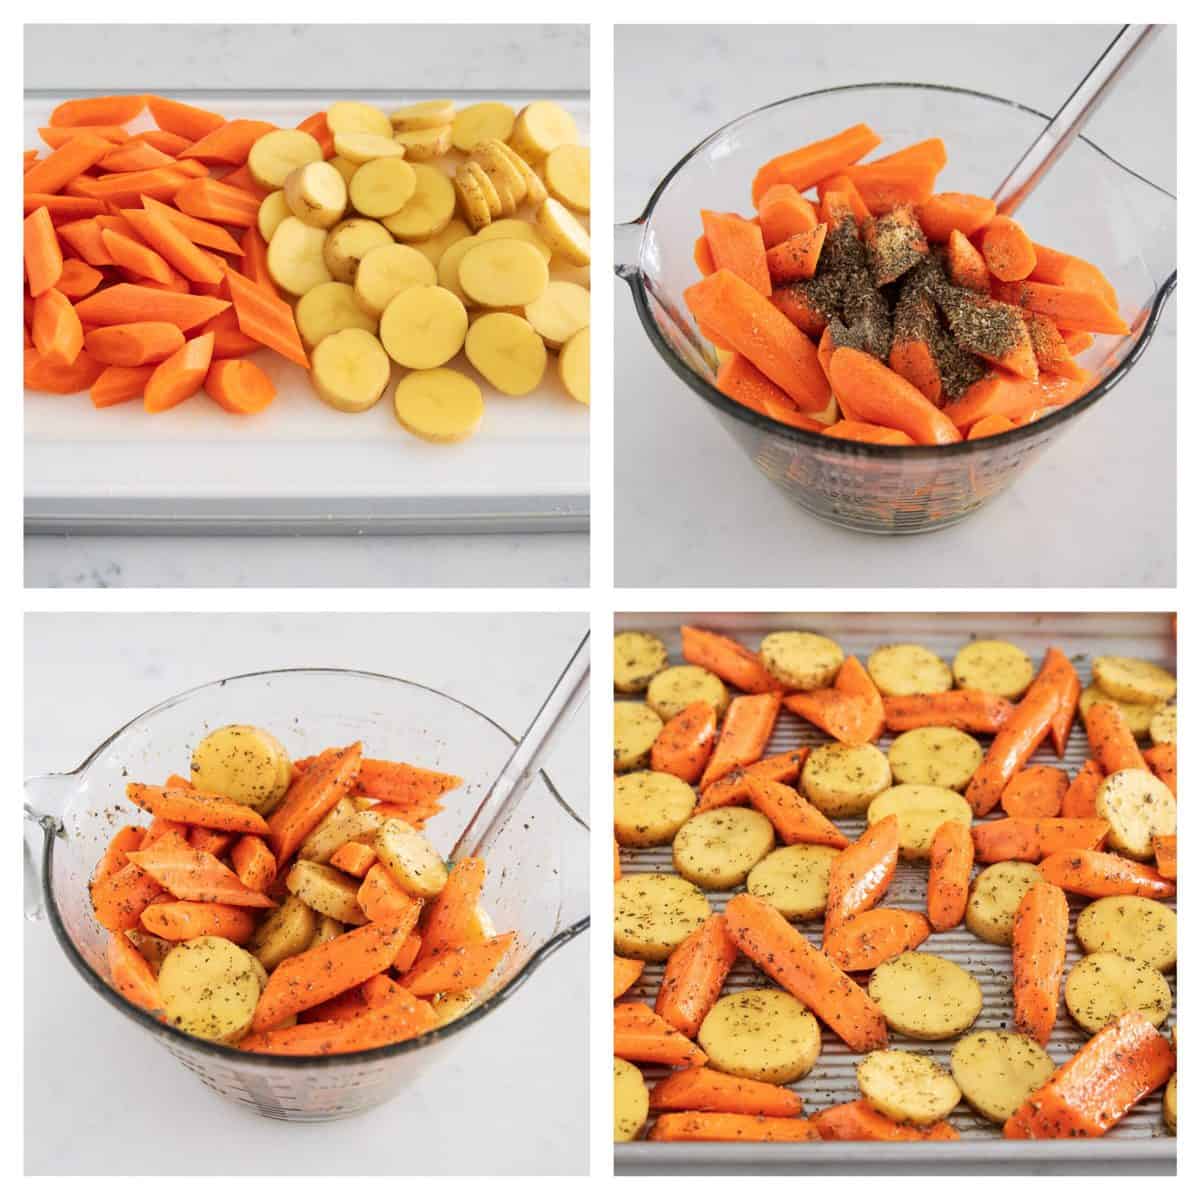 Roasted potatoes and carrots collage.